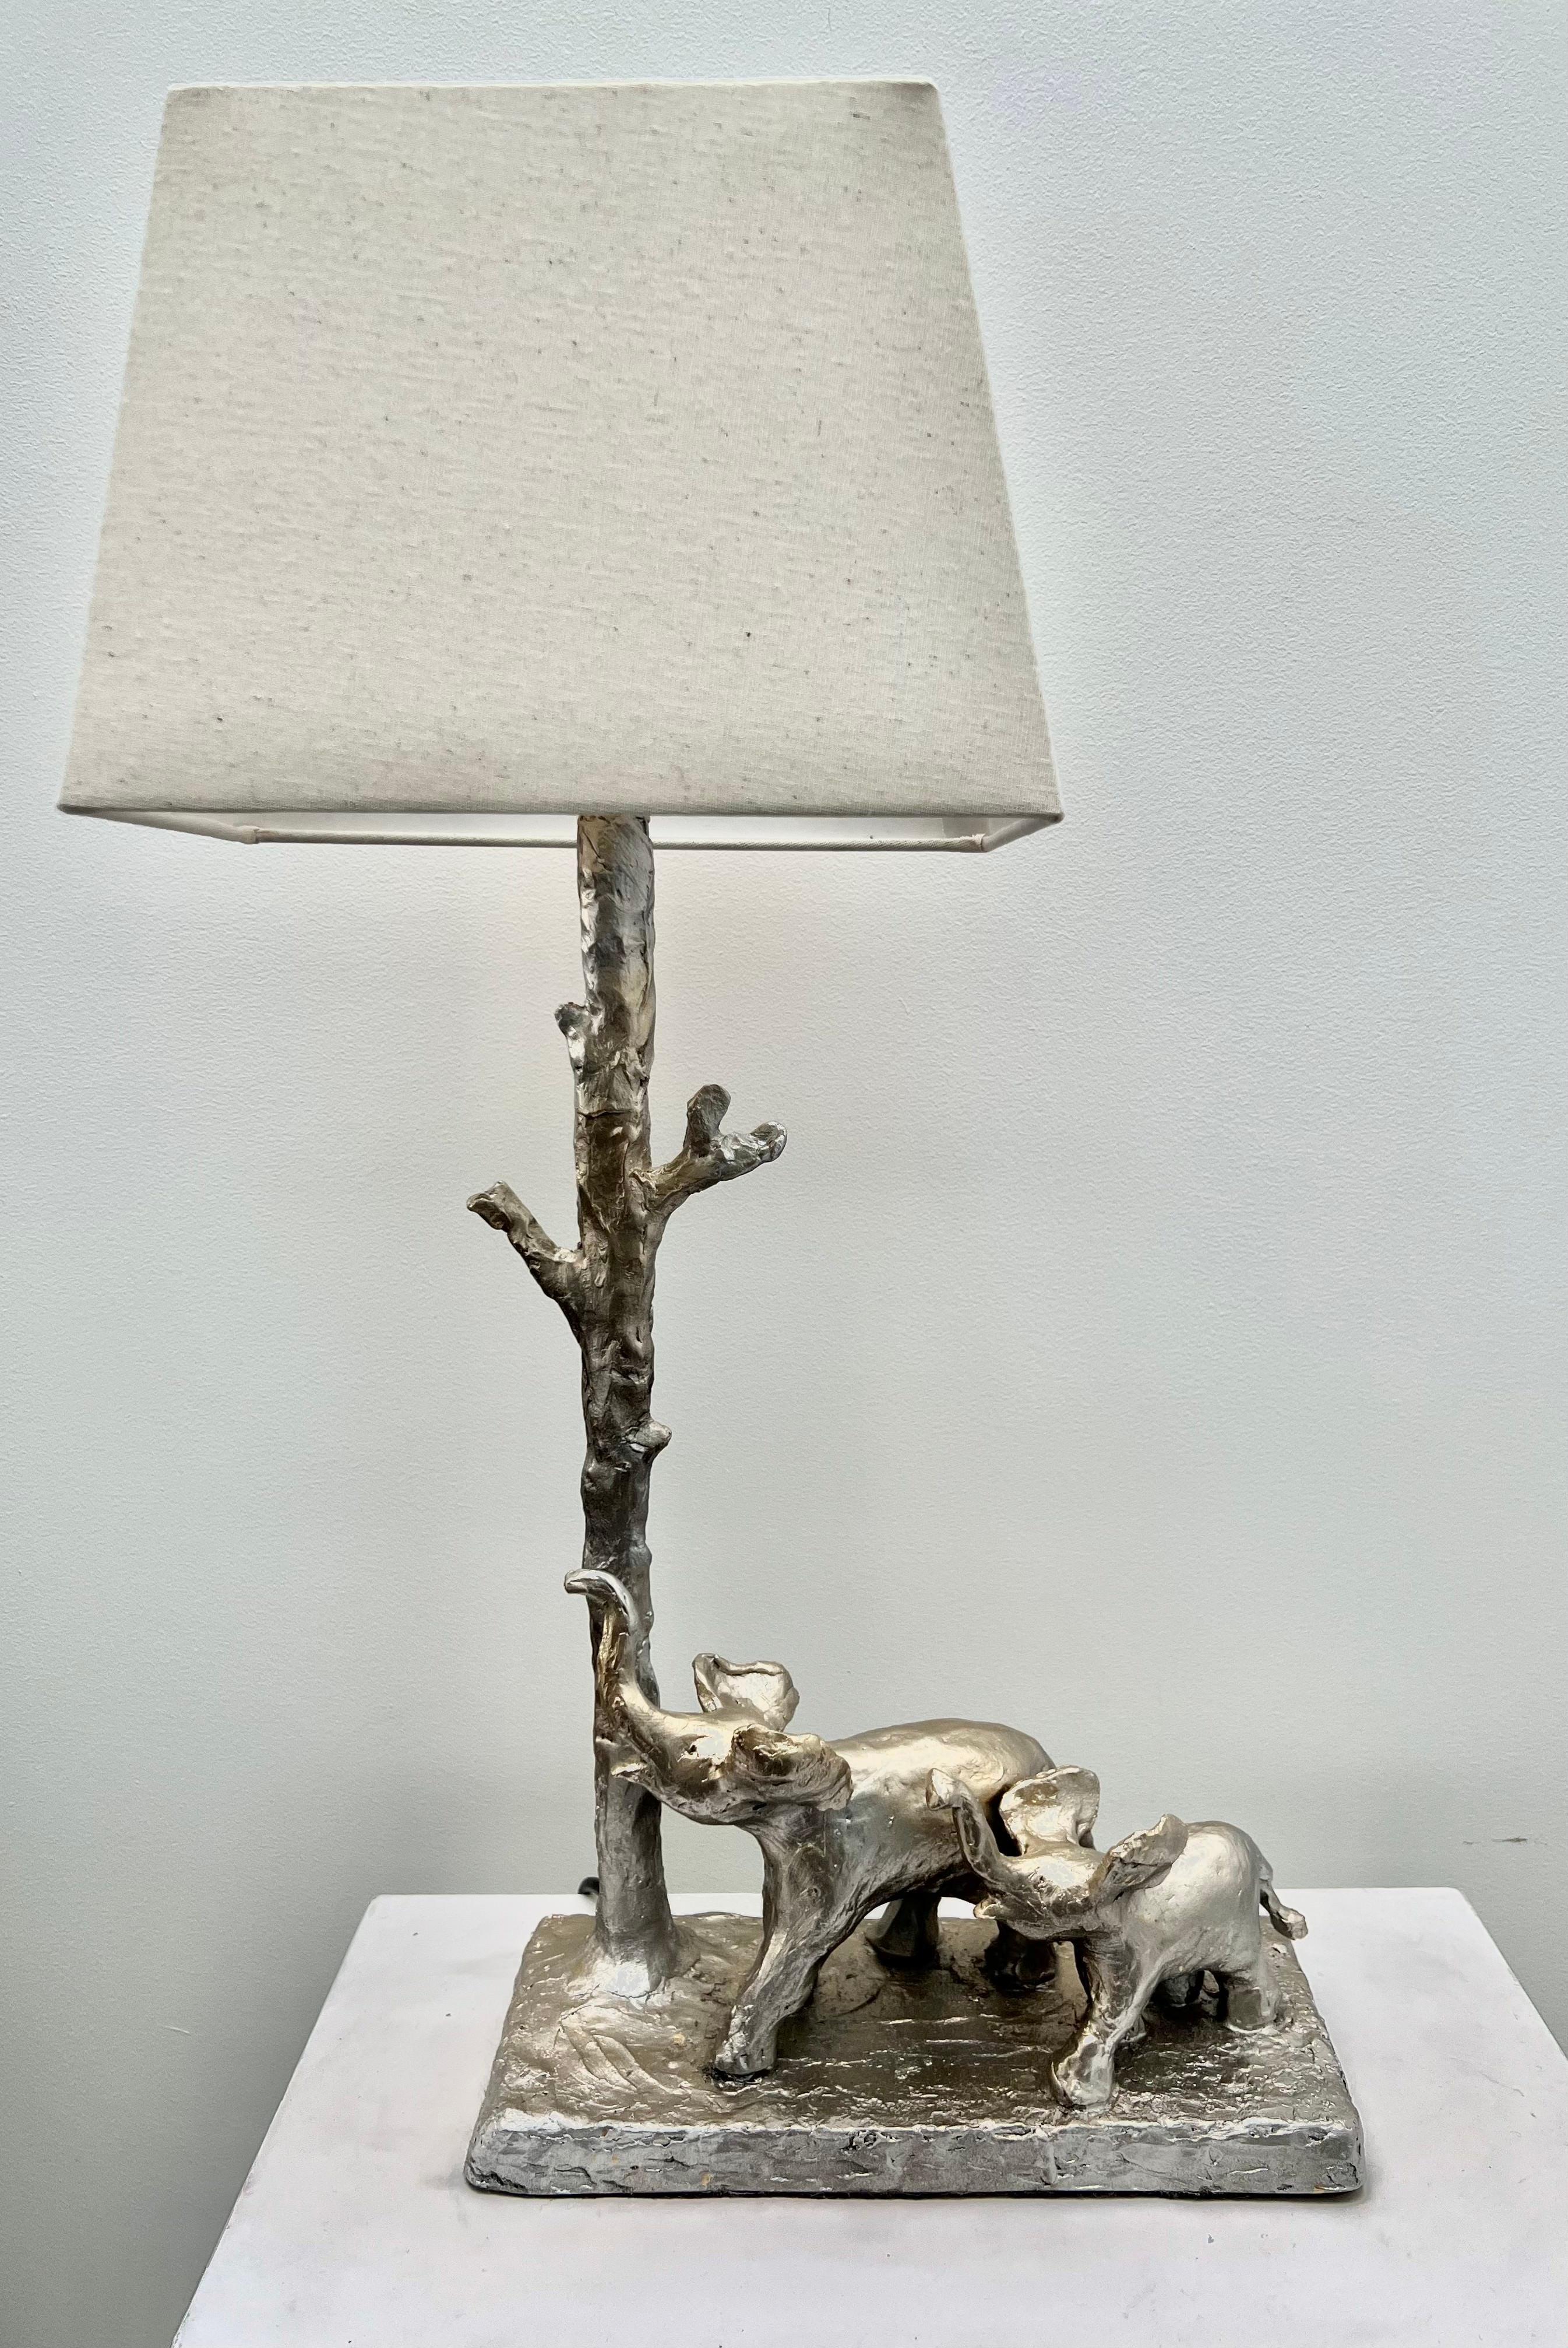 A  sculptural table lamp of an elephant mother and baby strolling happily with their trunks up . A functional artwork,  hand crafted ,moulded and cast in a light resin. 
All lamp's parts are individually assembled and fixed onto a long base.
A